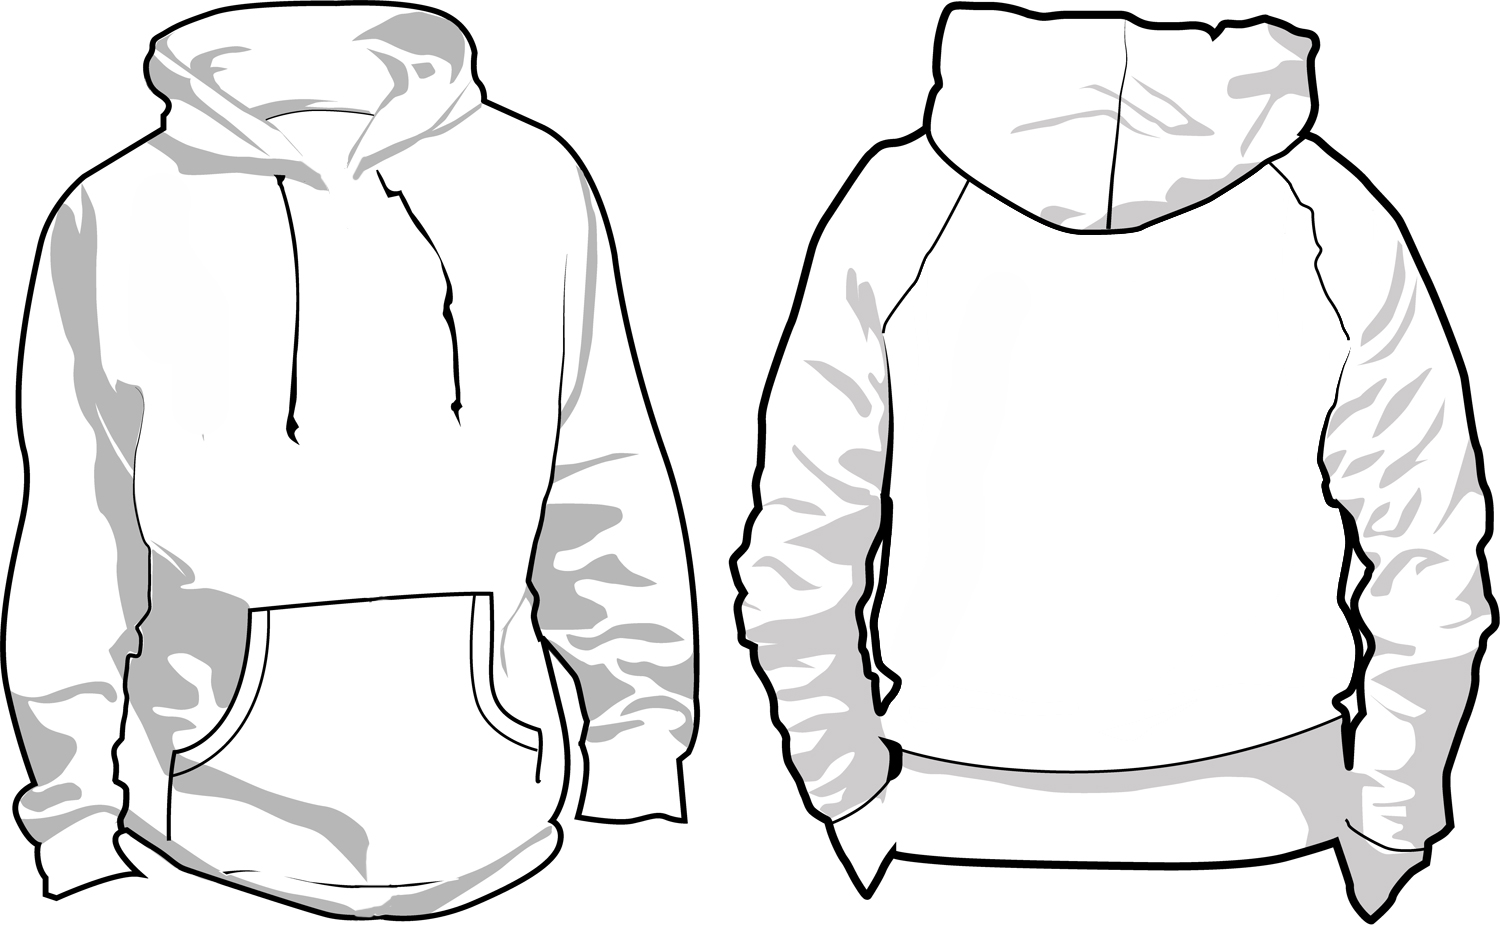 Free Blank Sweaters Cliparts, Download Free Clip Art, Free.